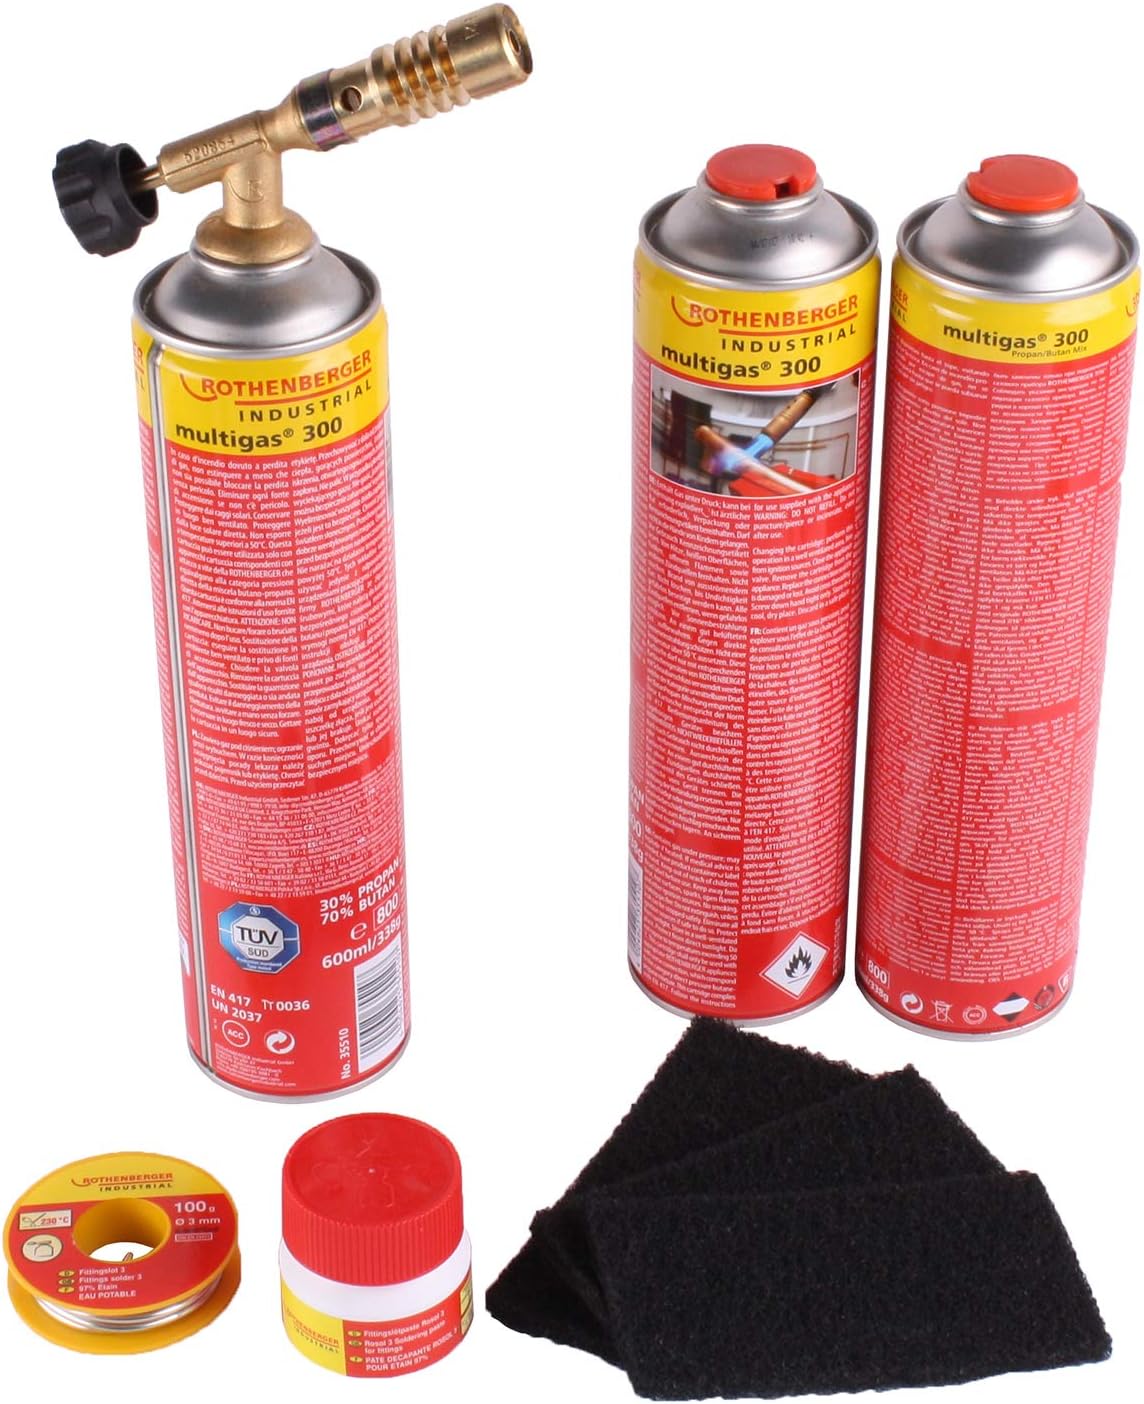 Rothenberger Industrial Hot Pack